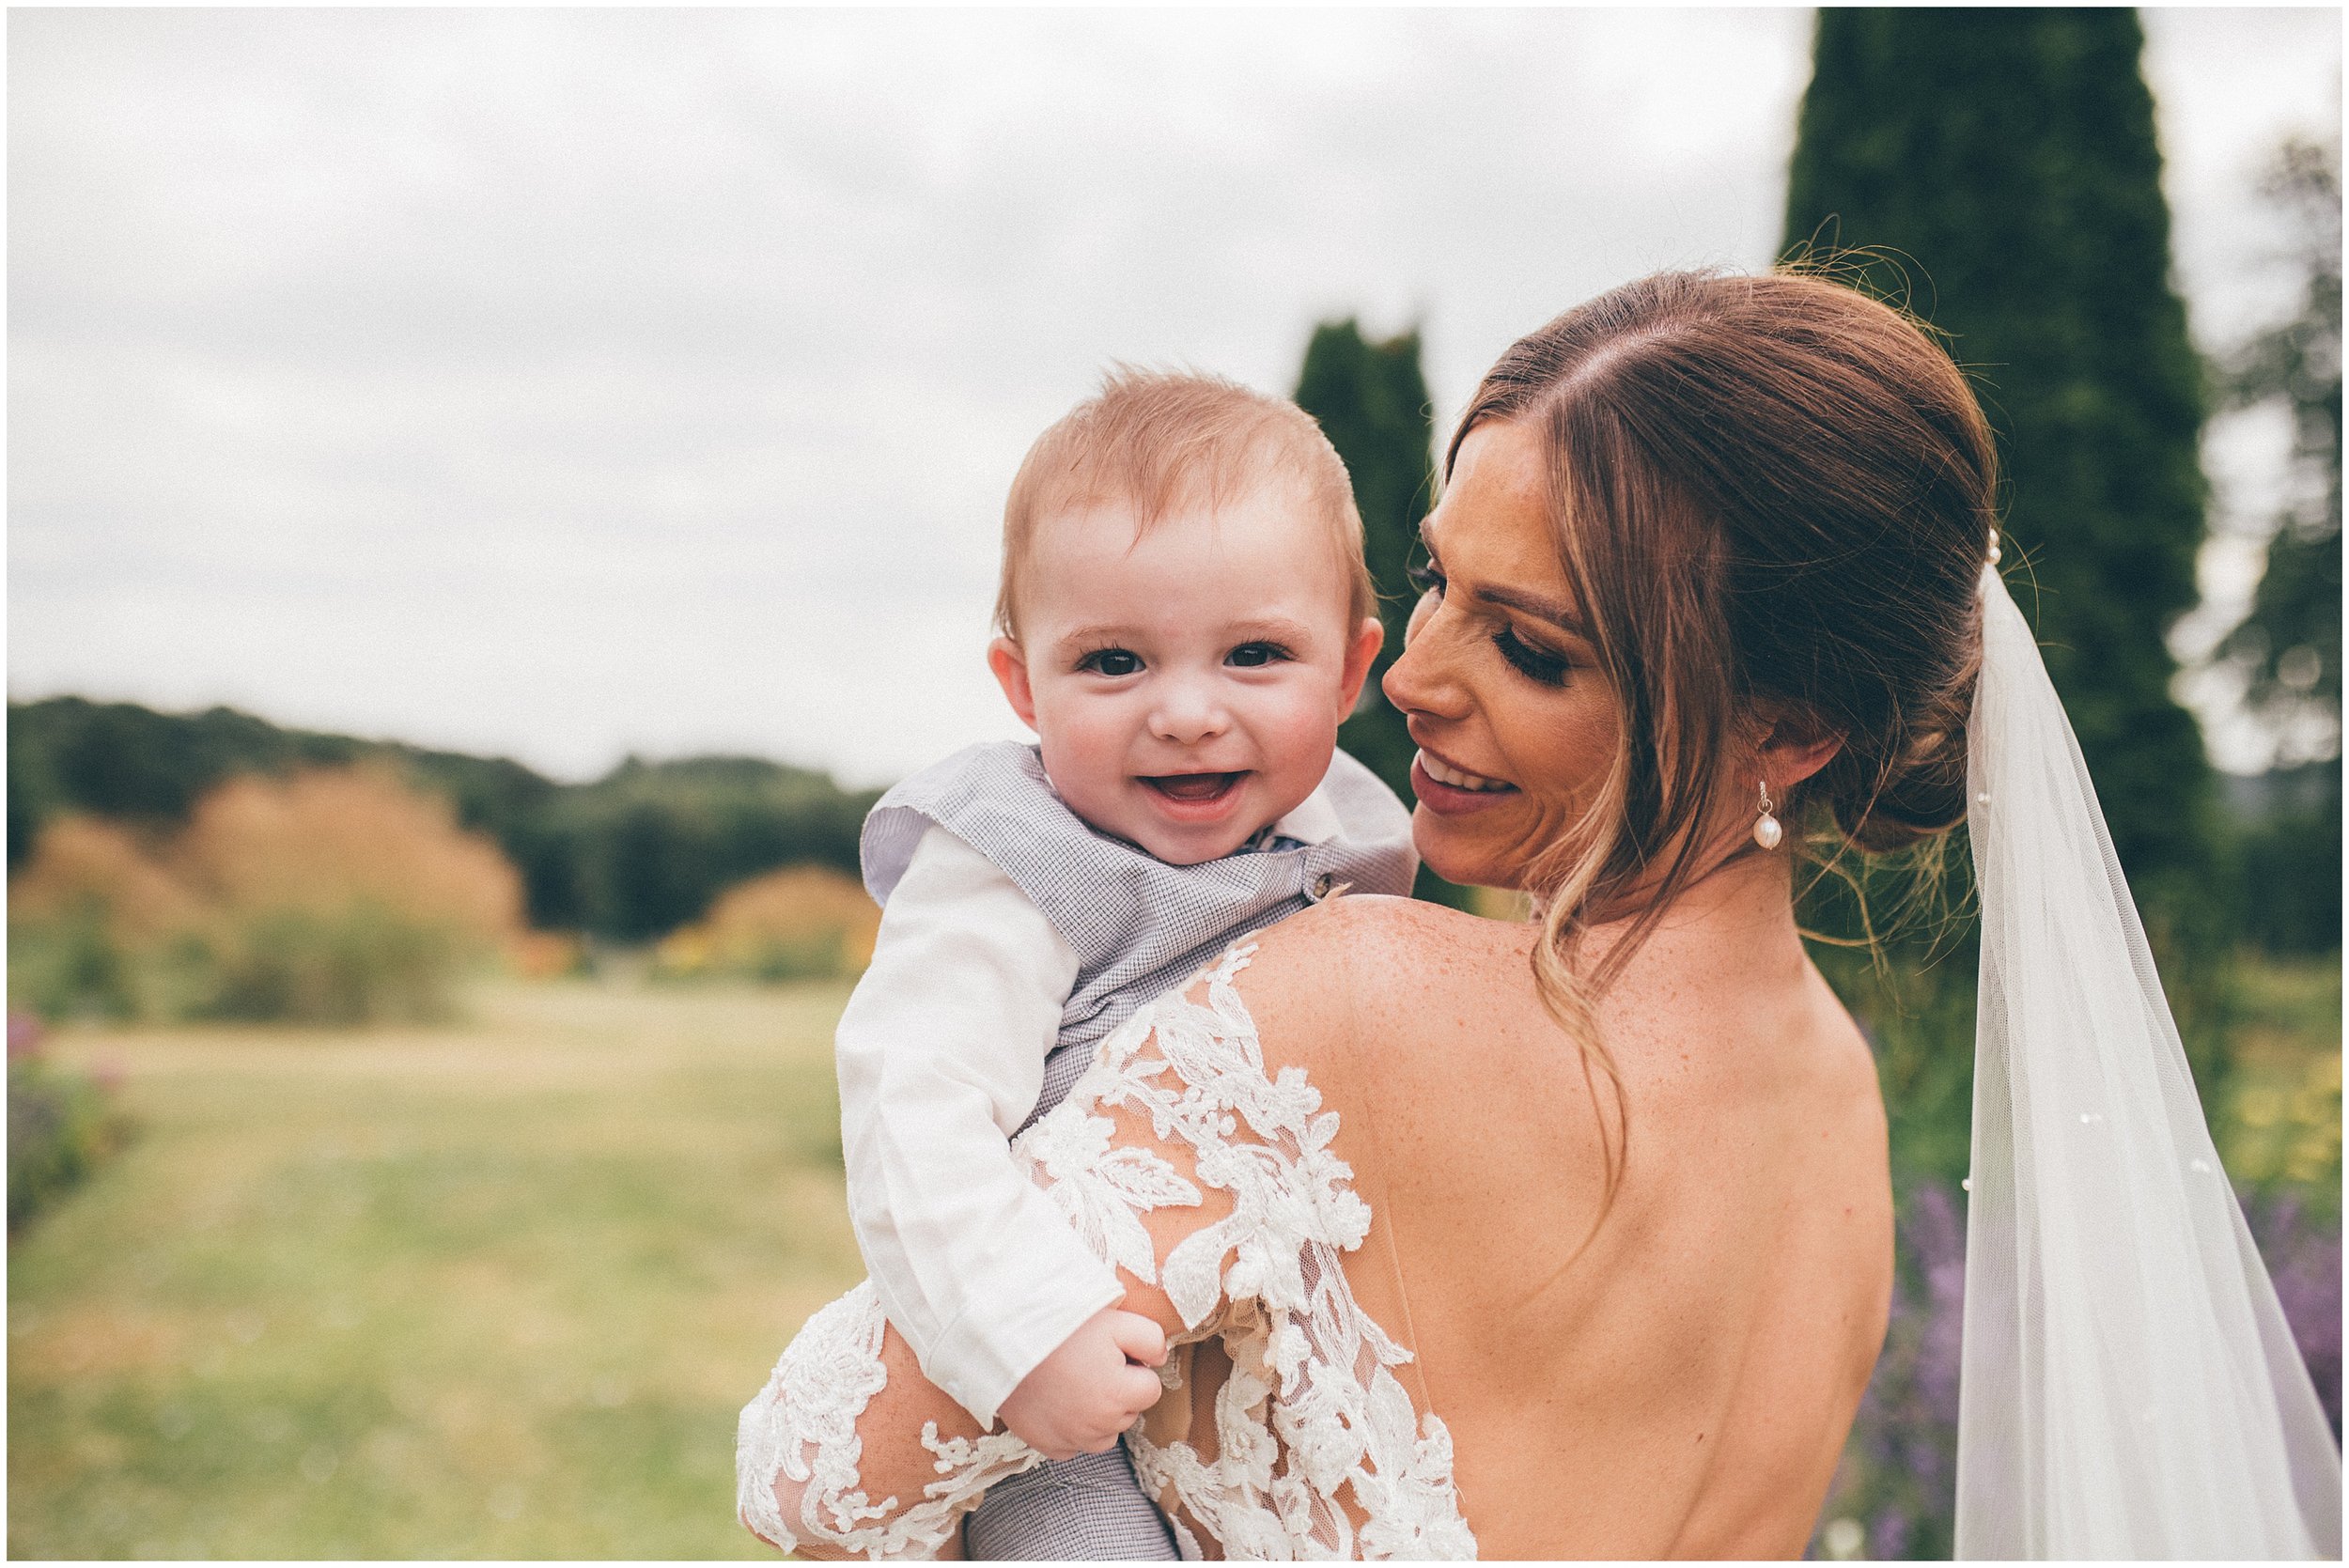 Beautiful bride and her son enjoy the pretty gardens at Abbeywood Estate in Delamere, Cheshire.